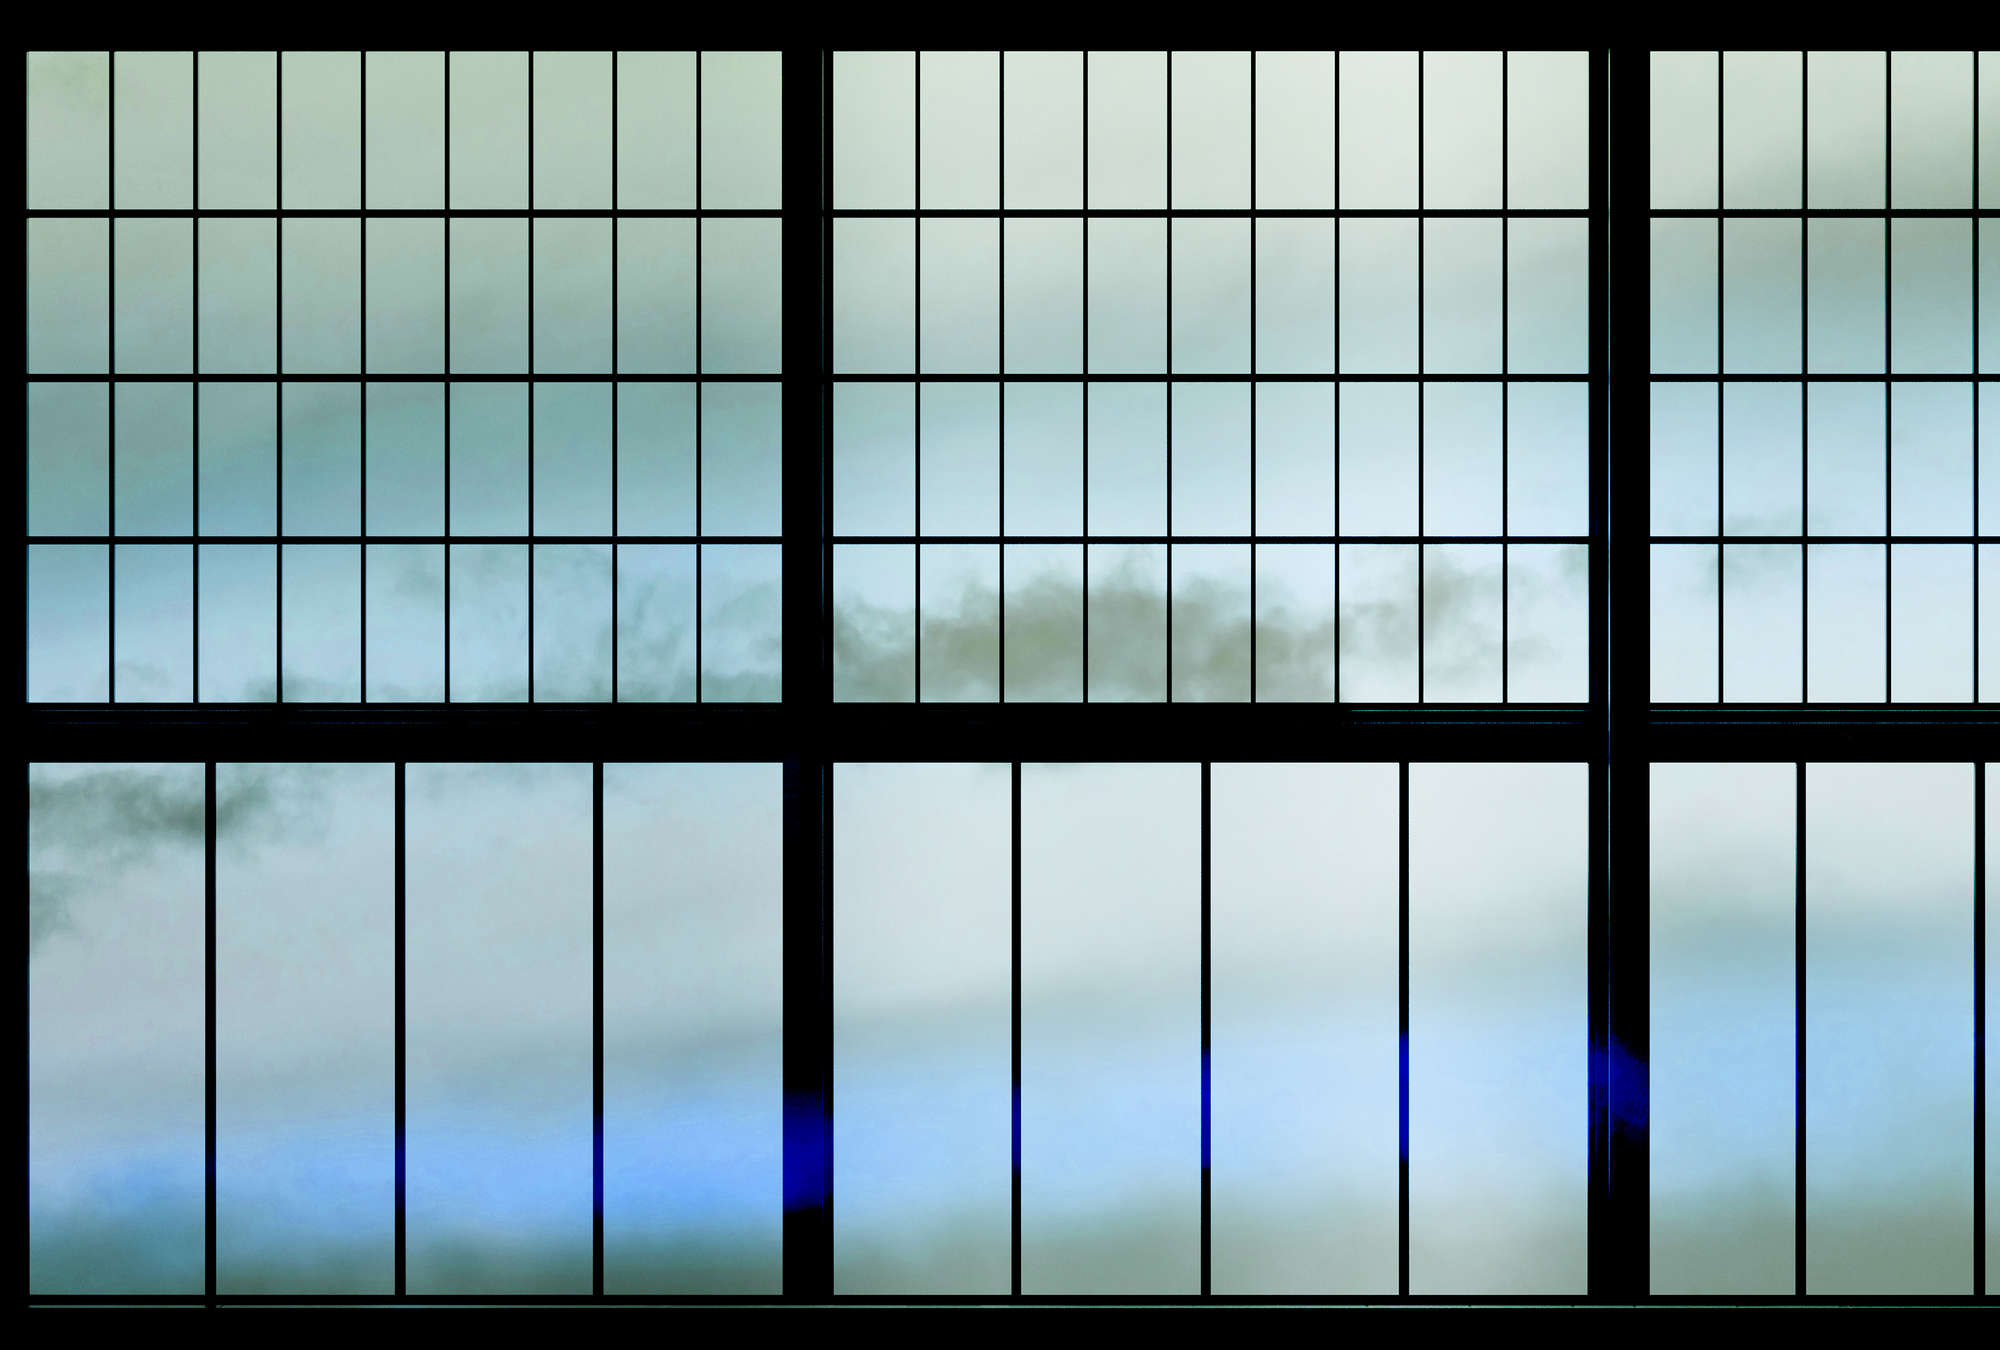             Sky 3 - Muntin Window with Cloudy Sky Wallpaper - Blue, Black | Textured Nonwoven
        